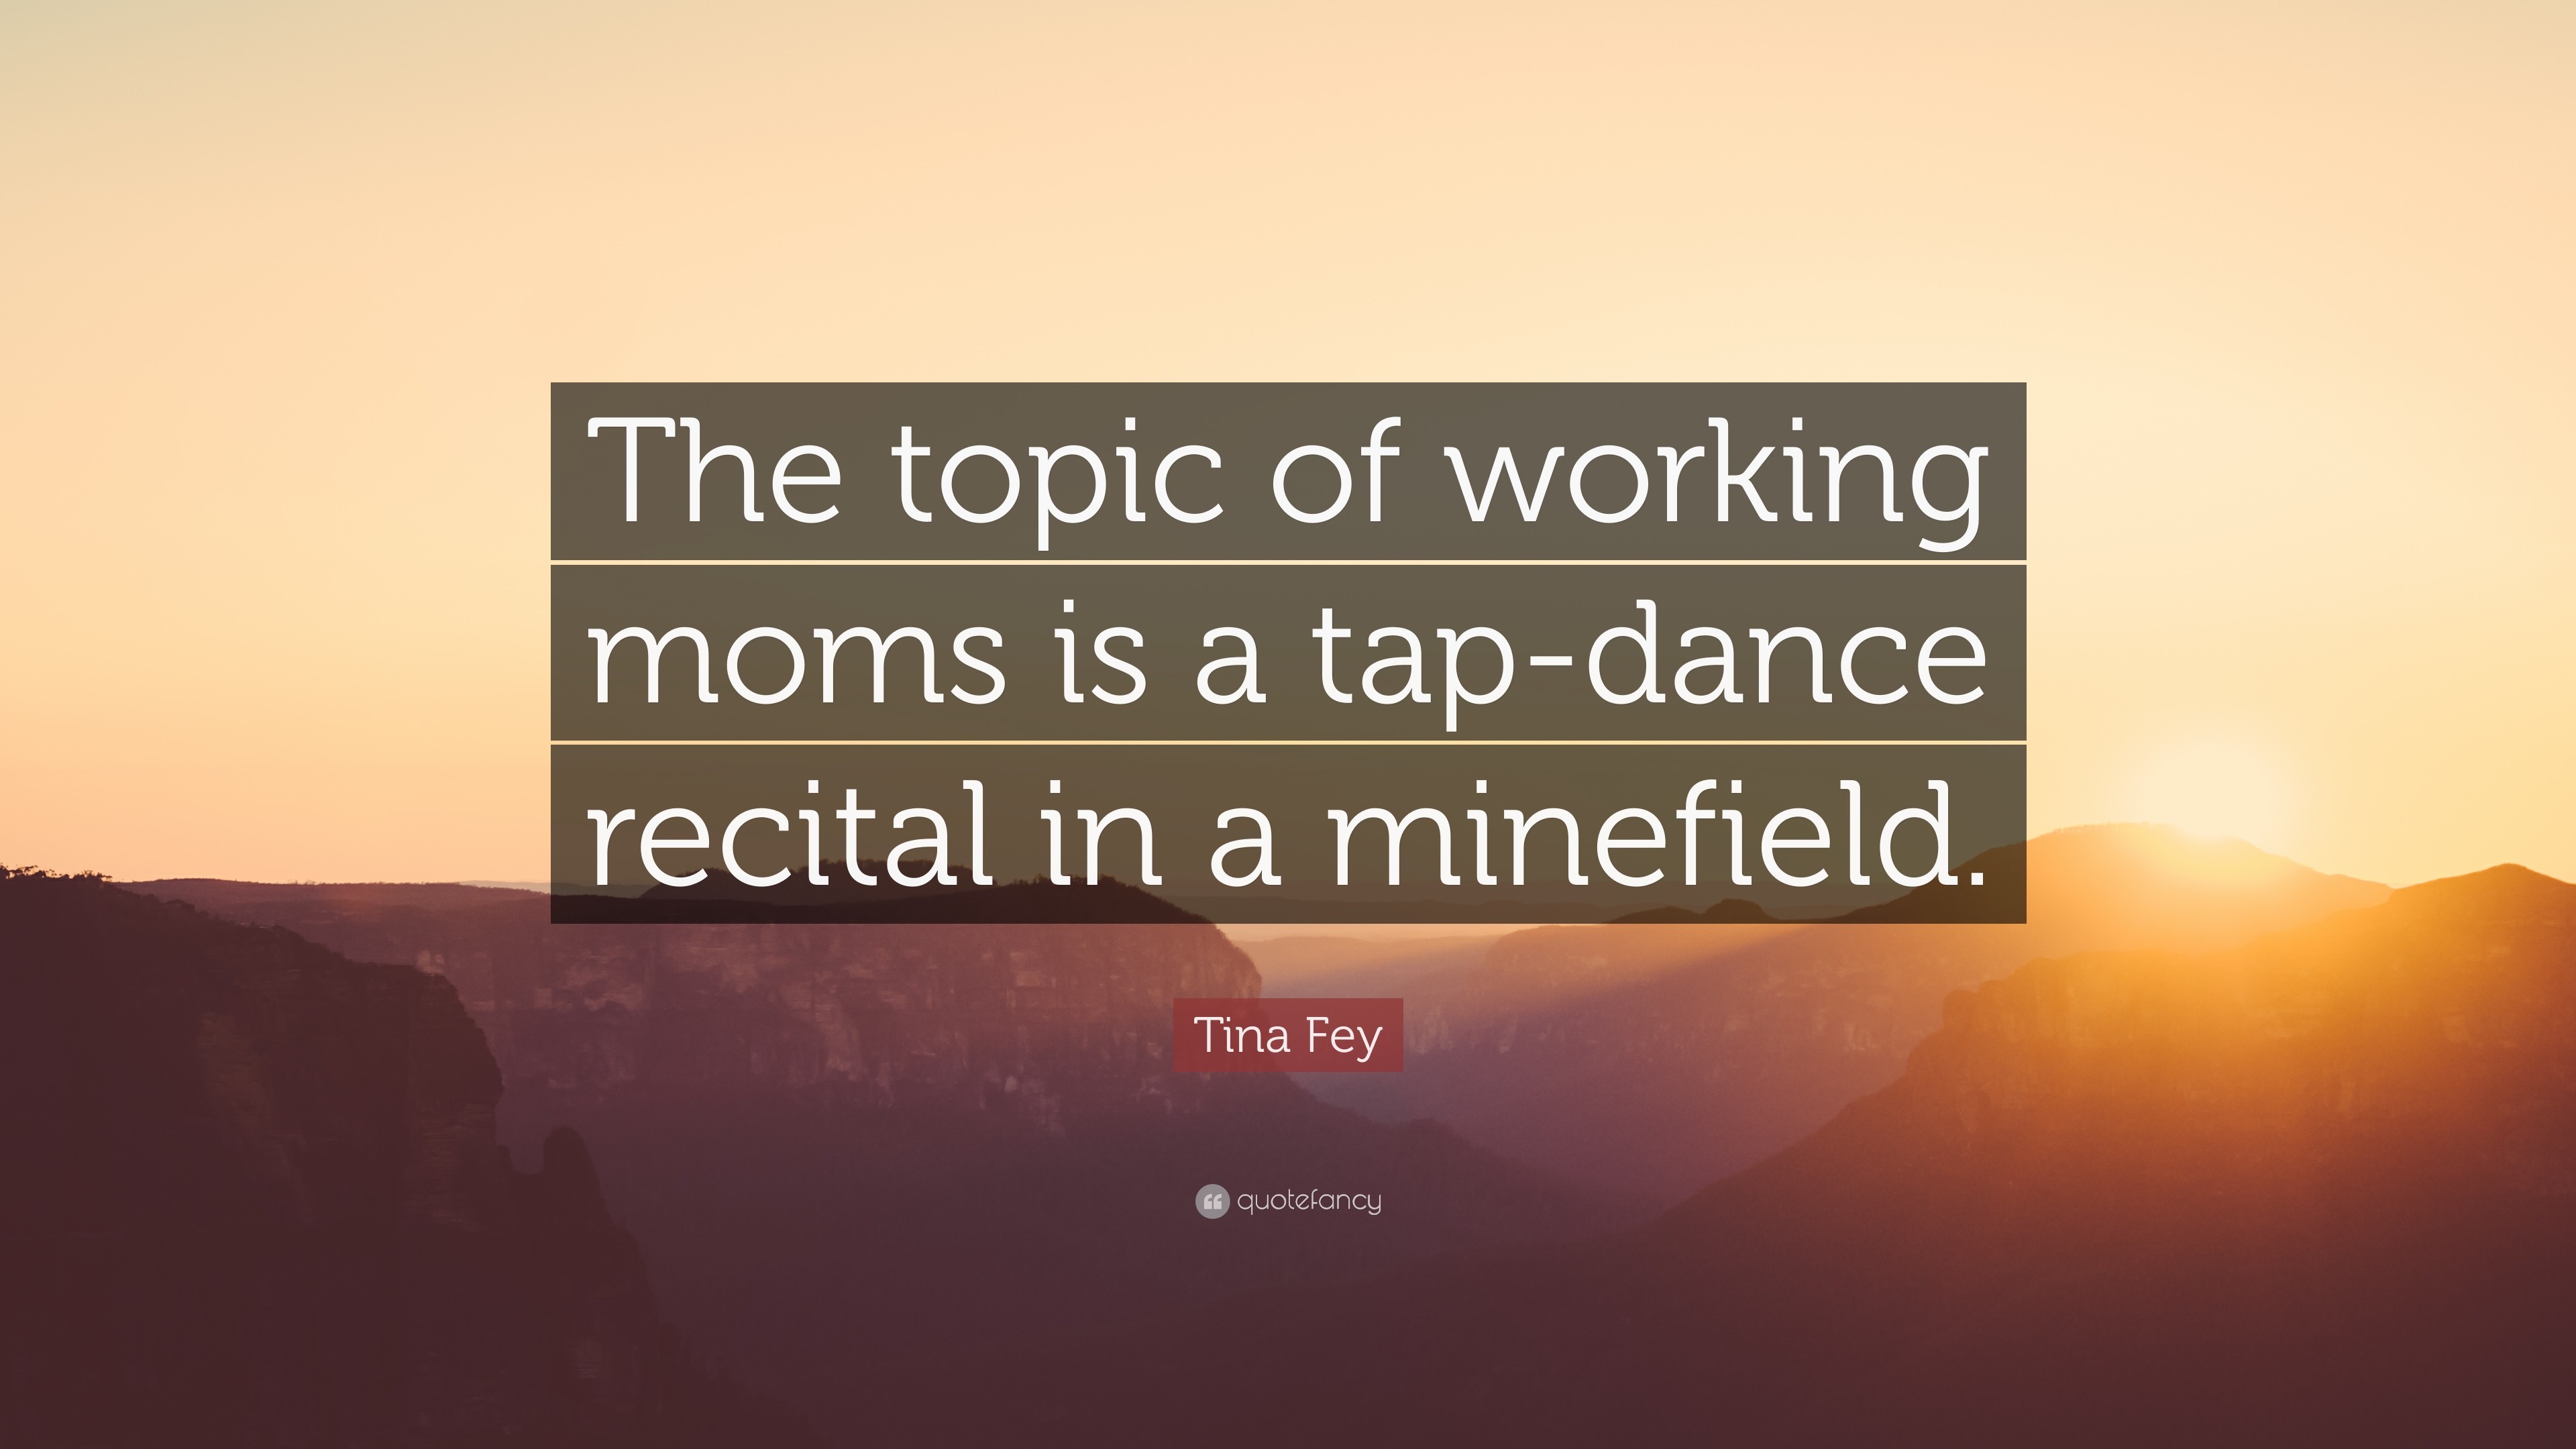 3840x2160 Tina Fey Quote: “The topic of working moms is a tap-dance recital